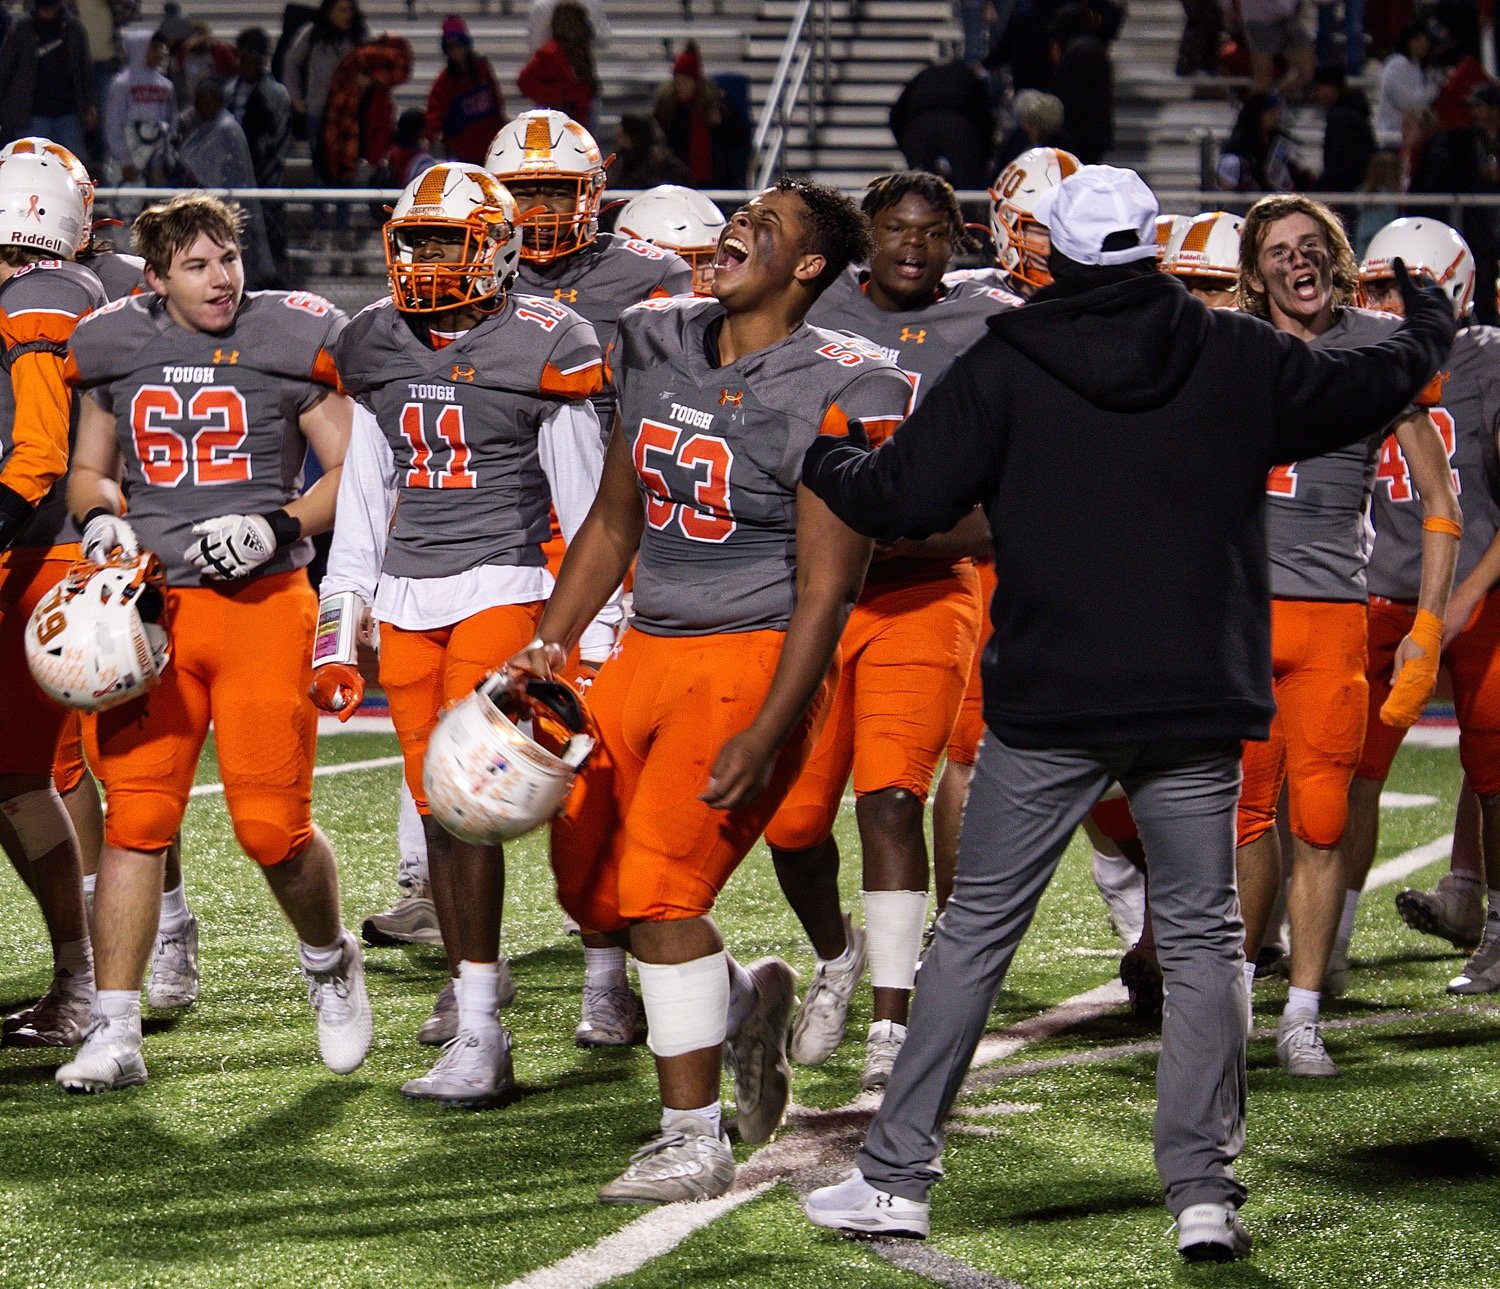 Isaiah Gardner (53) wasn't the only Yellowjacket excited after their win over Sabine on Friday, but he may have been the best at expressing it. [Get all the Yellowjacket action]